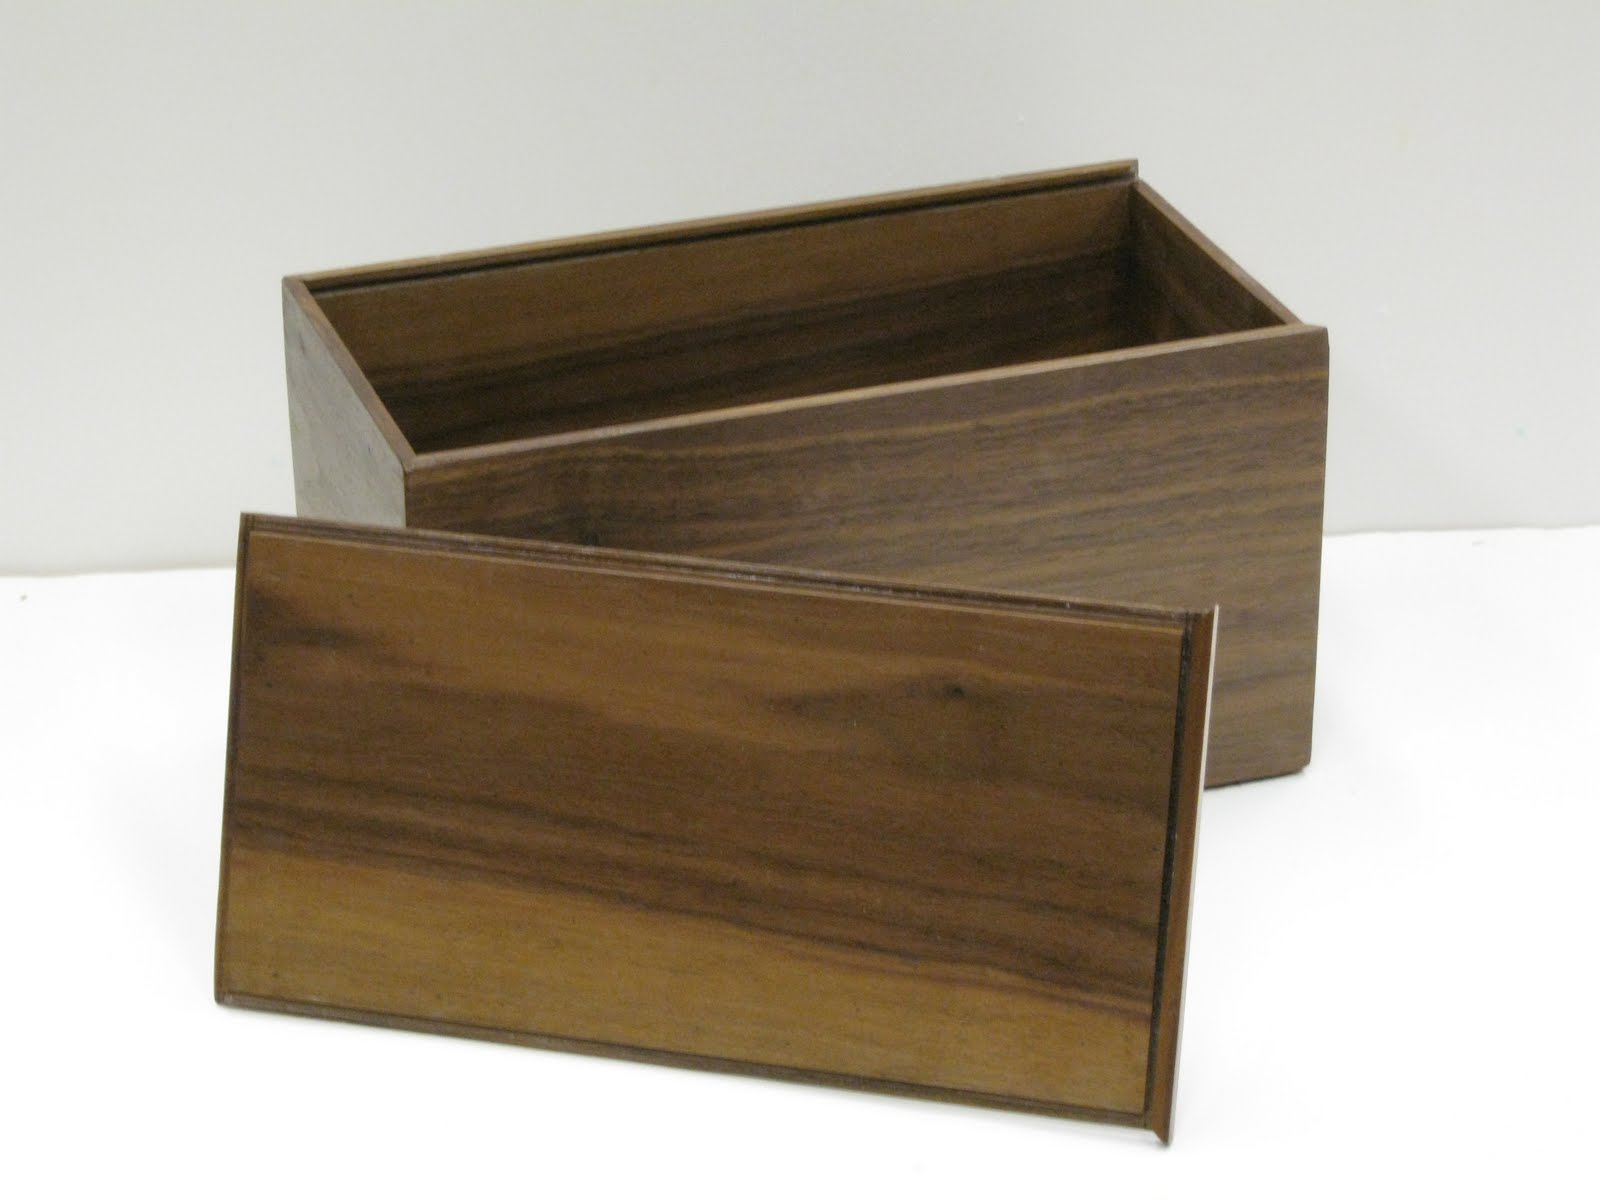 WP Wood Working: Wooden Boxes